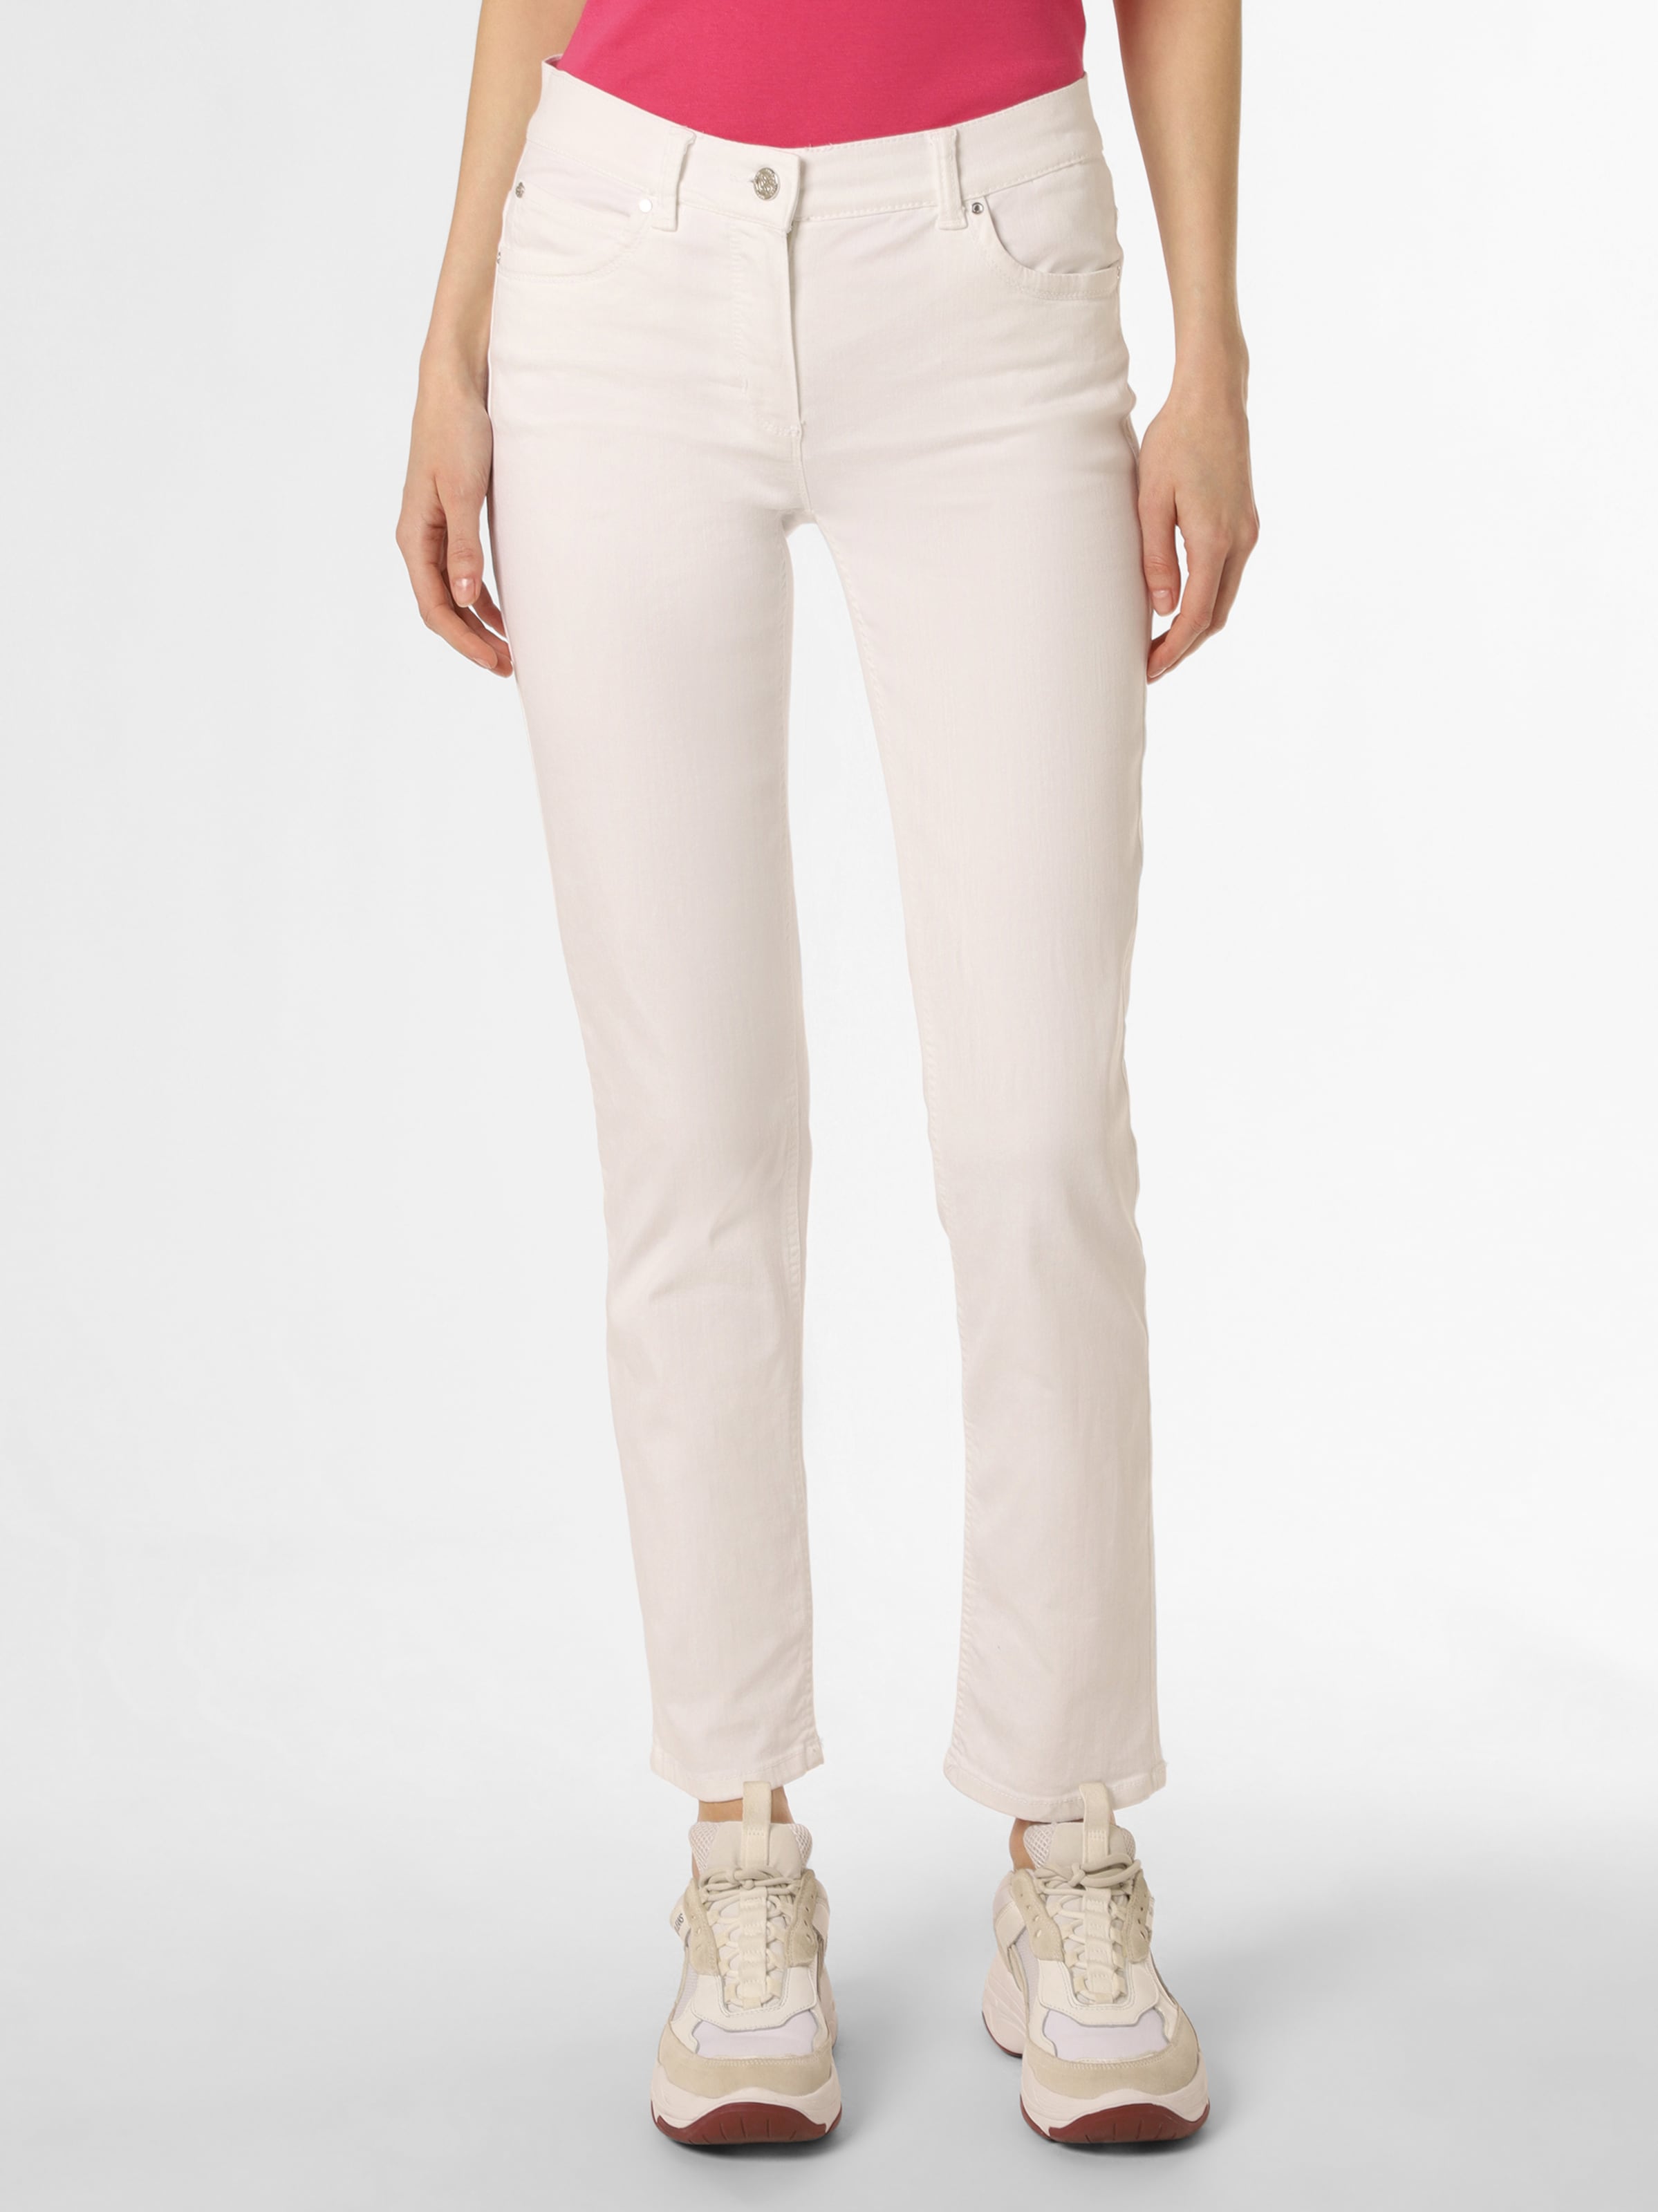 Hej Personlig diskriminerende Anna Montana Slim fit Jeans 'Angelika' in White | ABOUT YOU